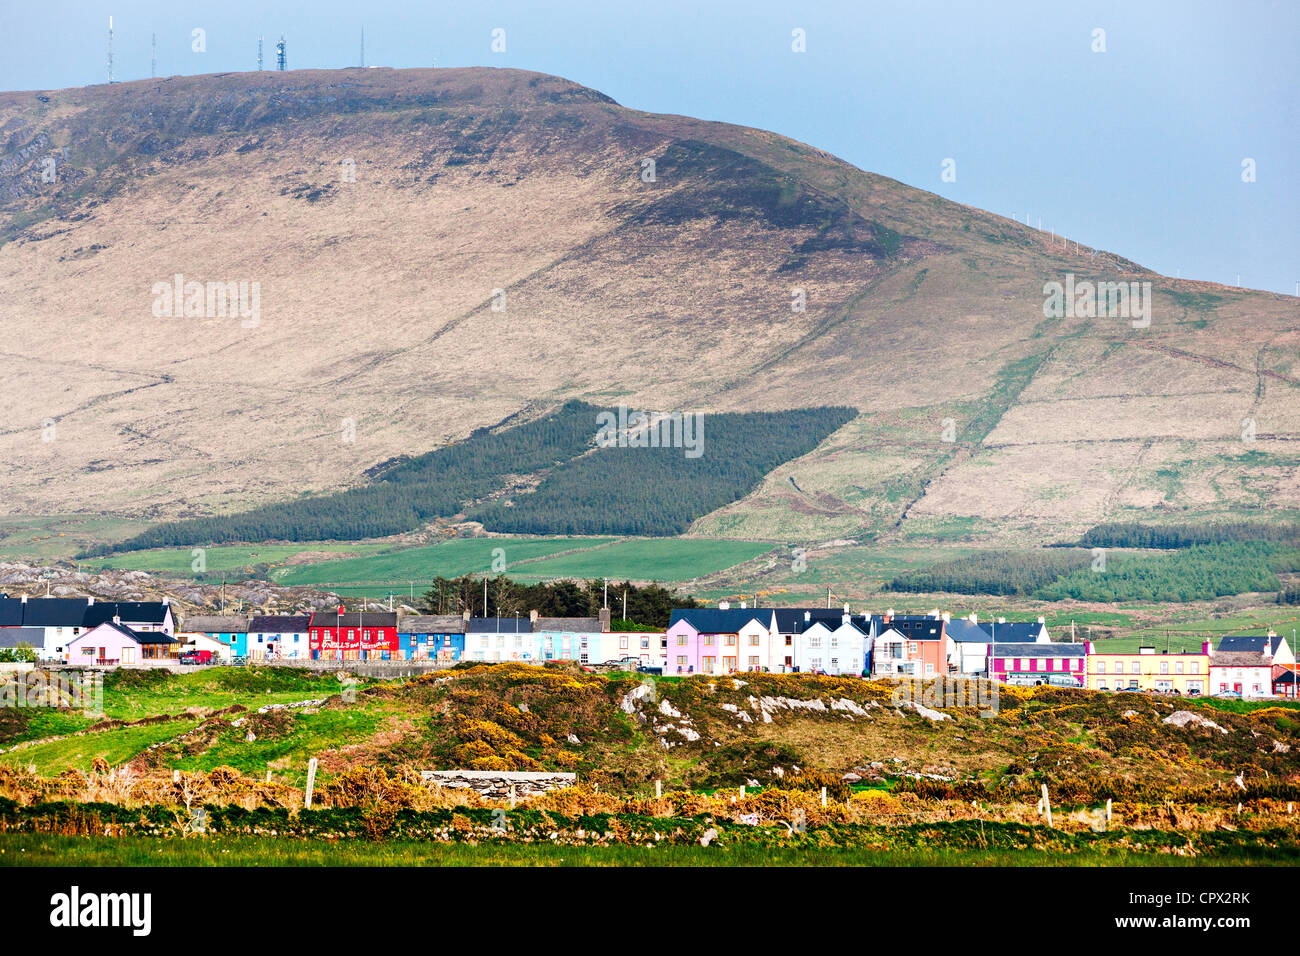 Village and mountains, allihies, county cork, ireland Stock Photo